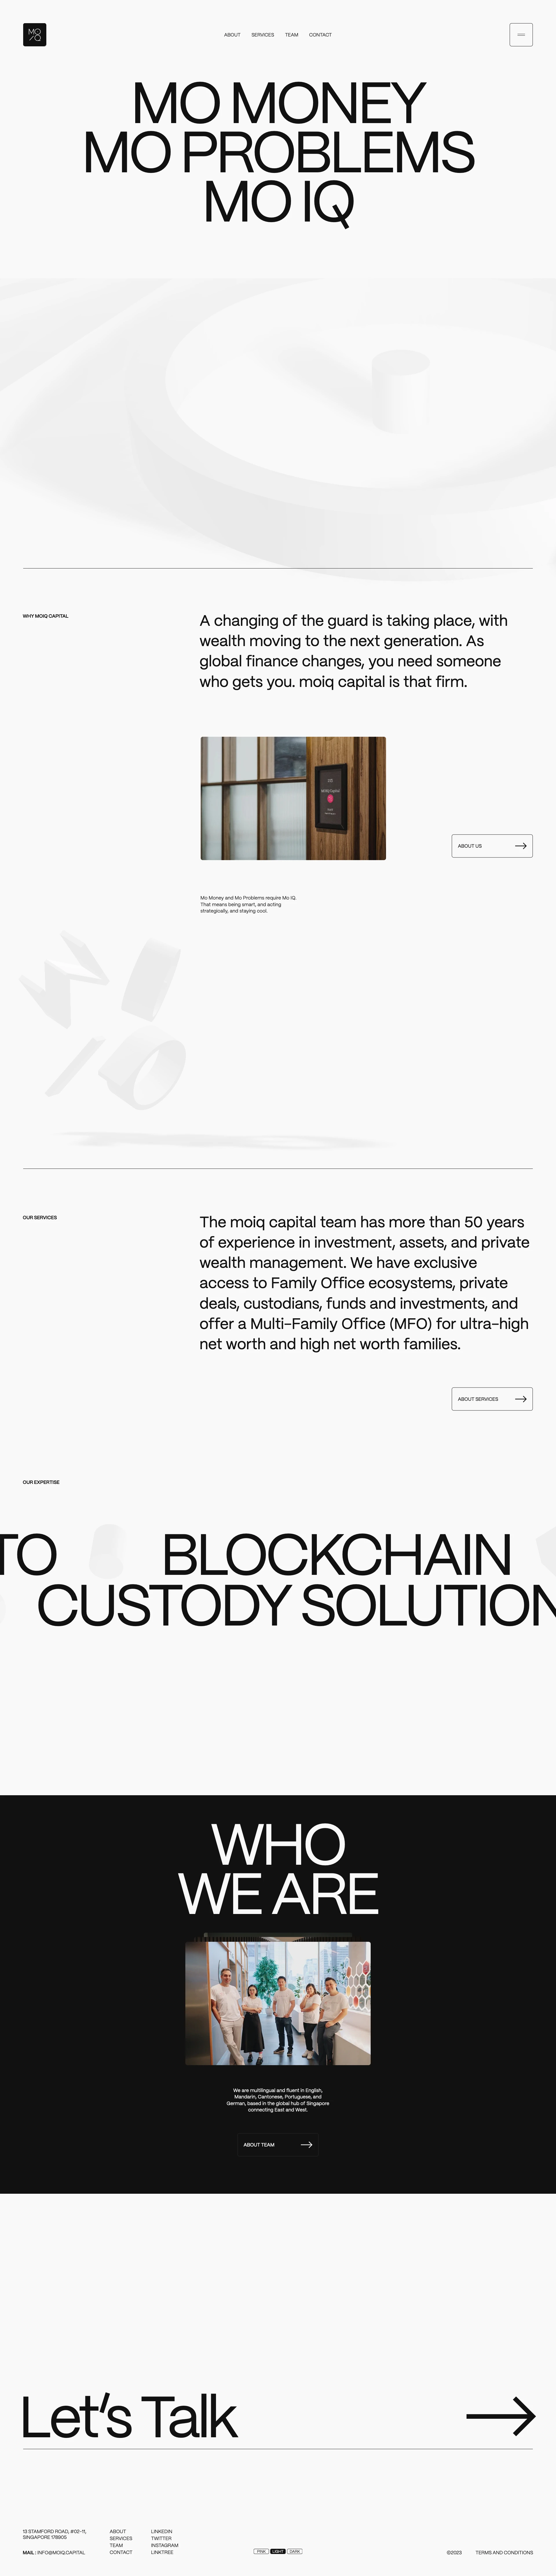 moiq capital Landing Page Example: moiq capital has more than 50 years of experience in investment, assets, and private wealth management.